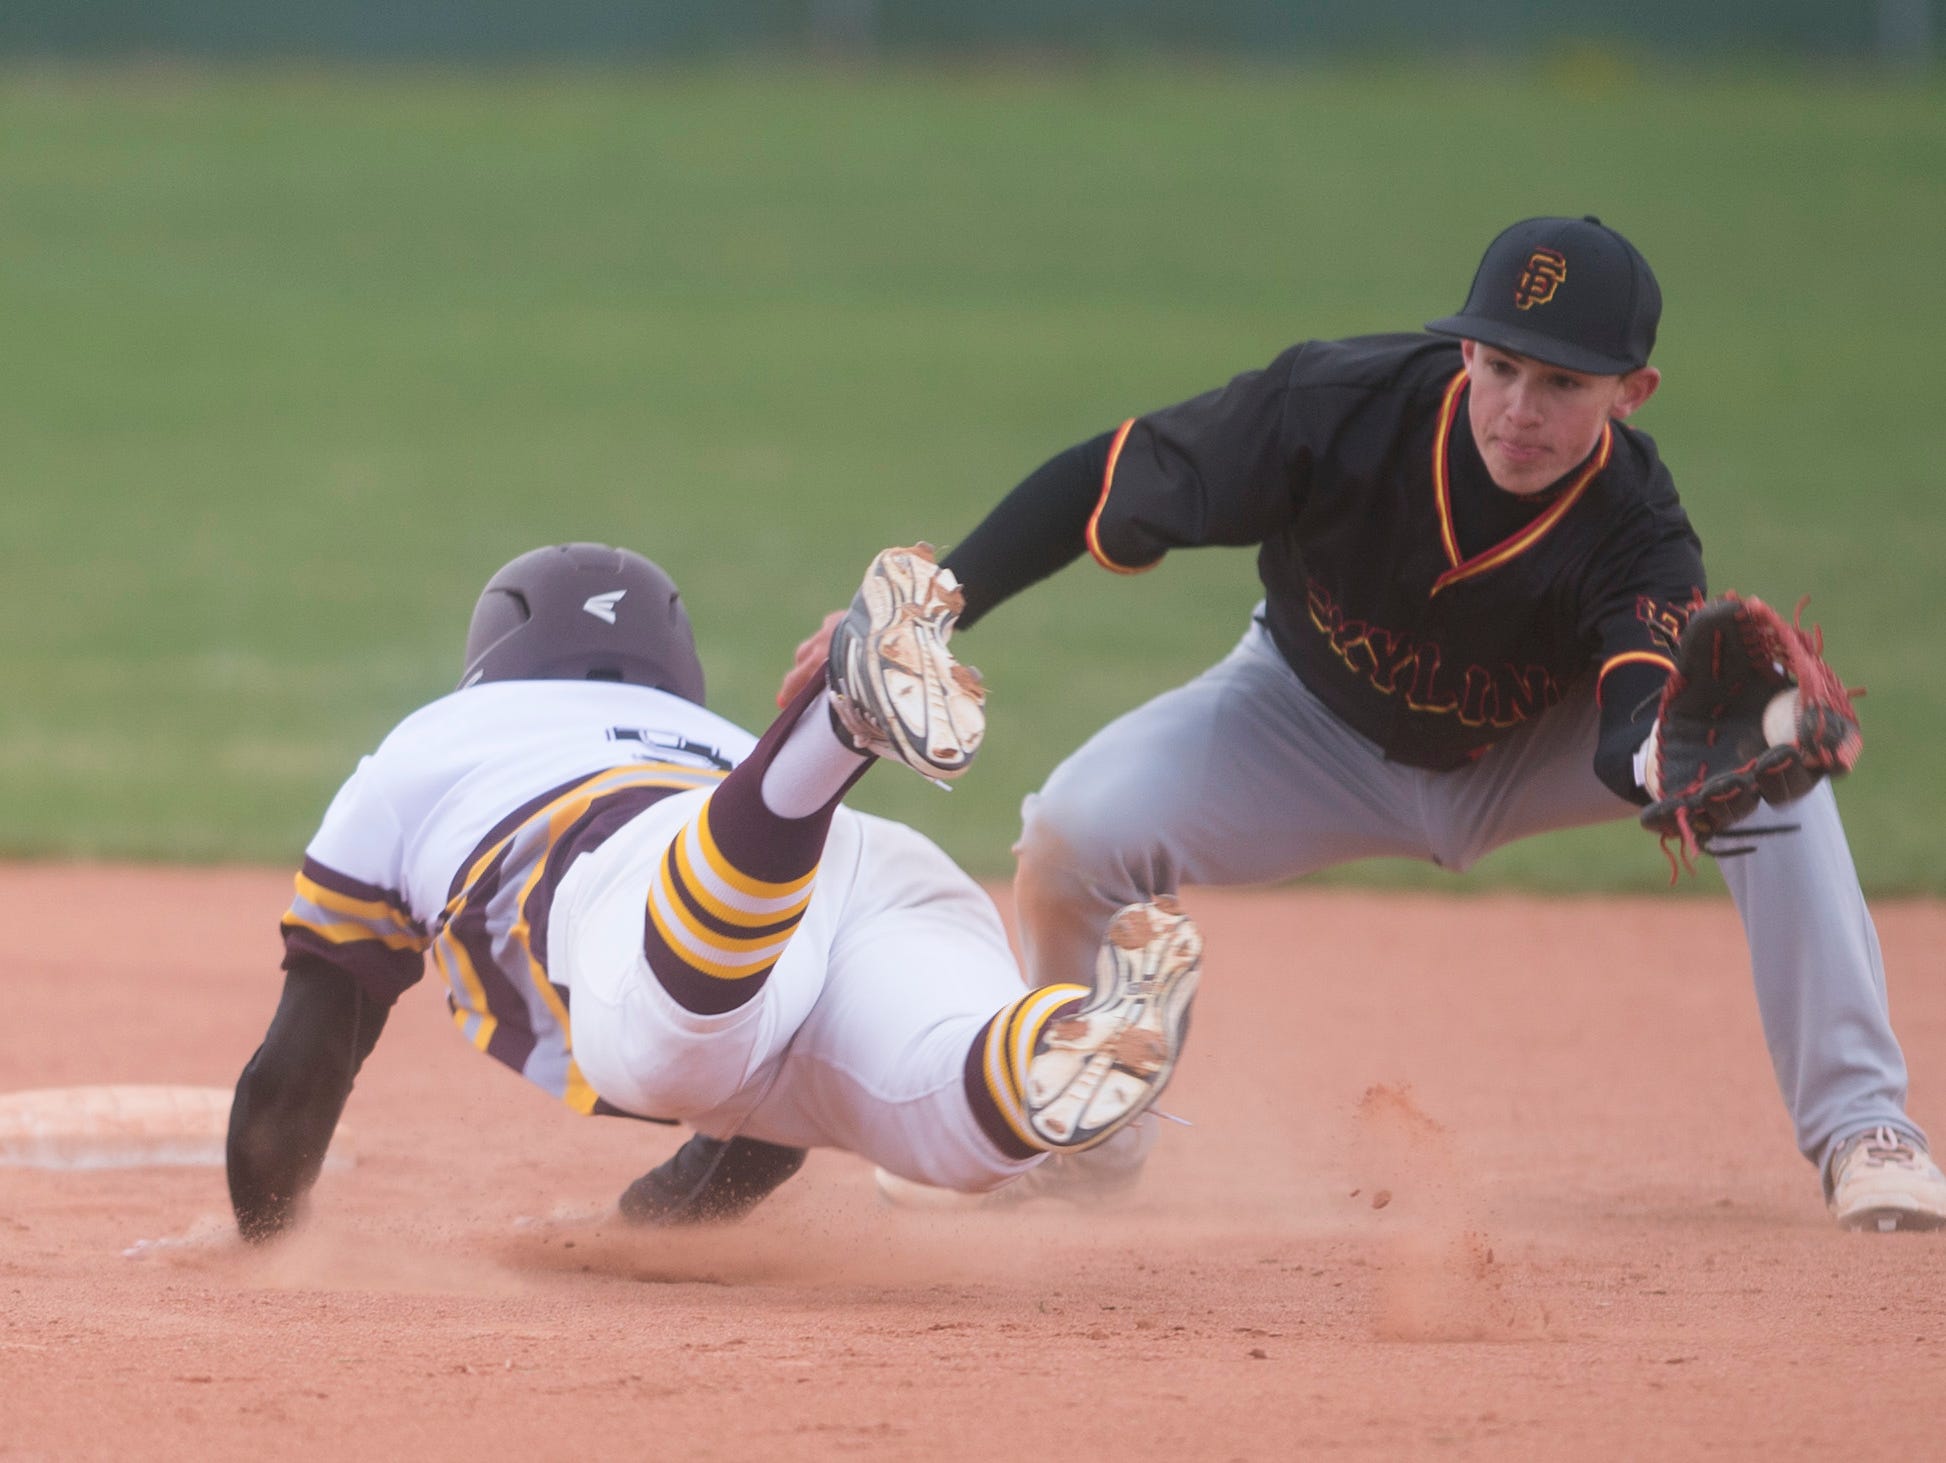 Windsor outfielder Jaden Traut slides into second base during a game against Skyline High School in Windsor Friday.